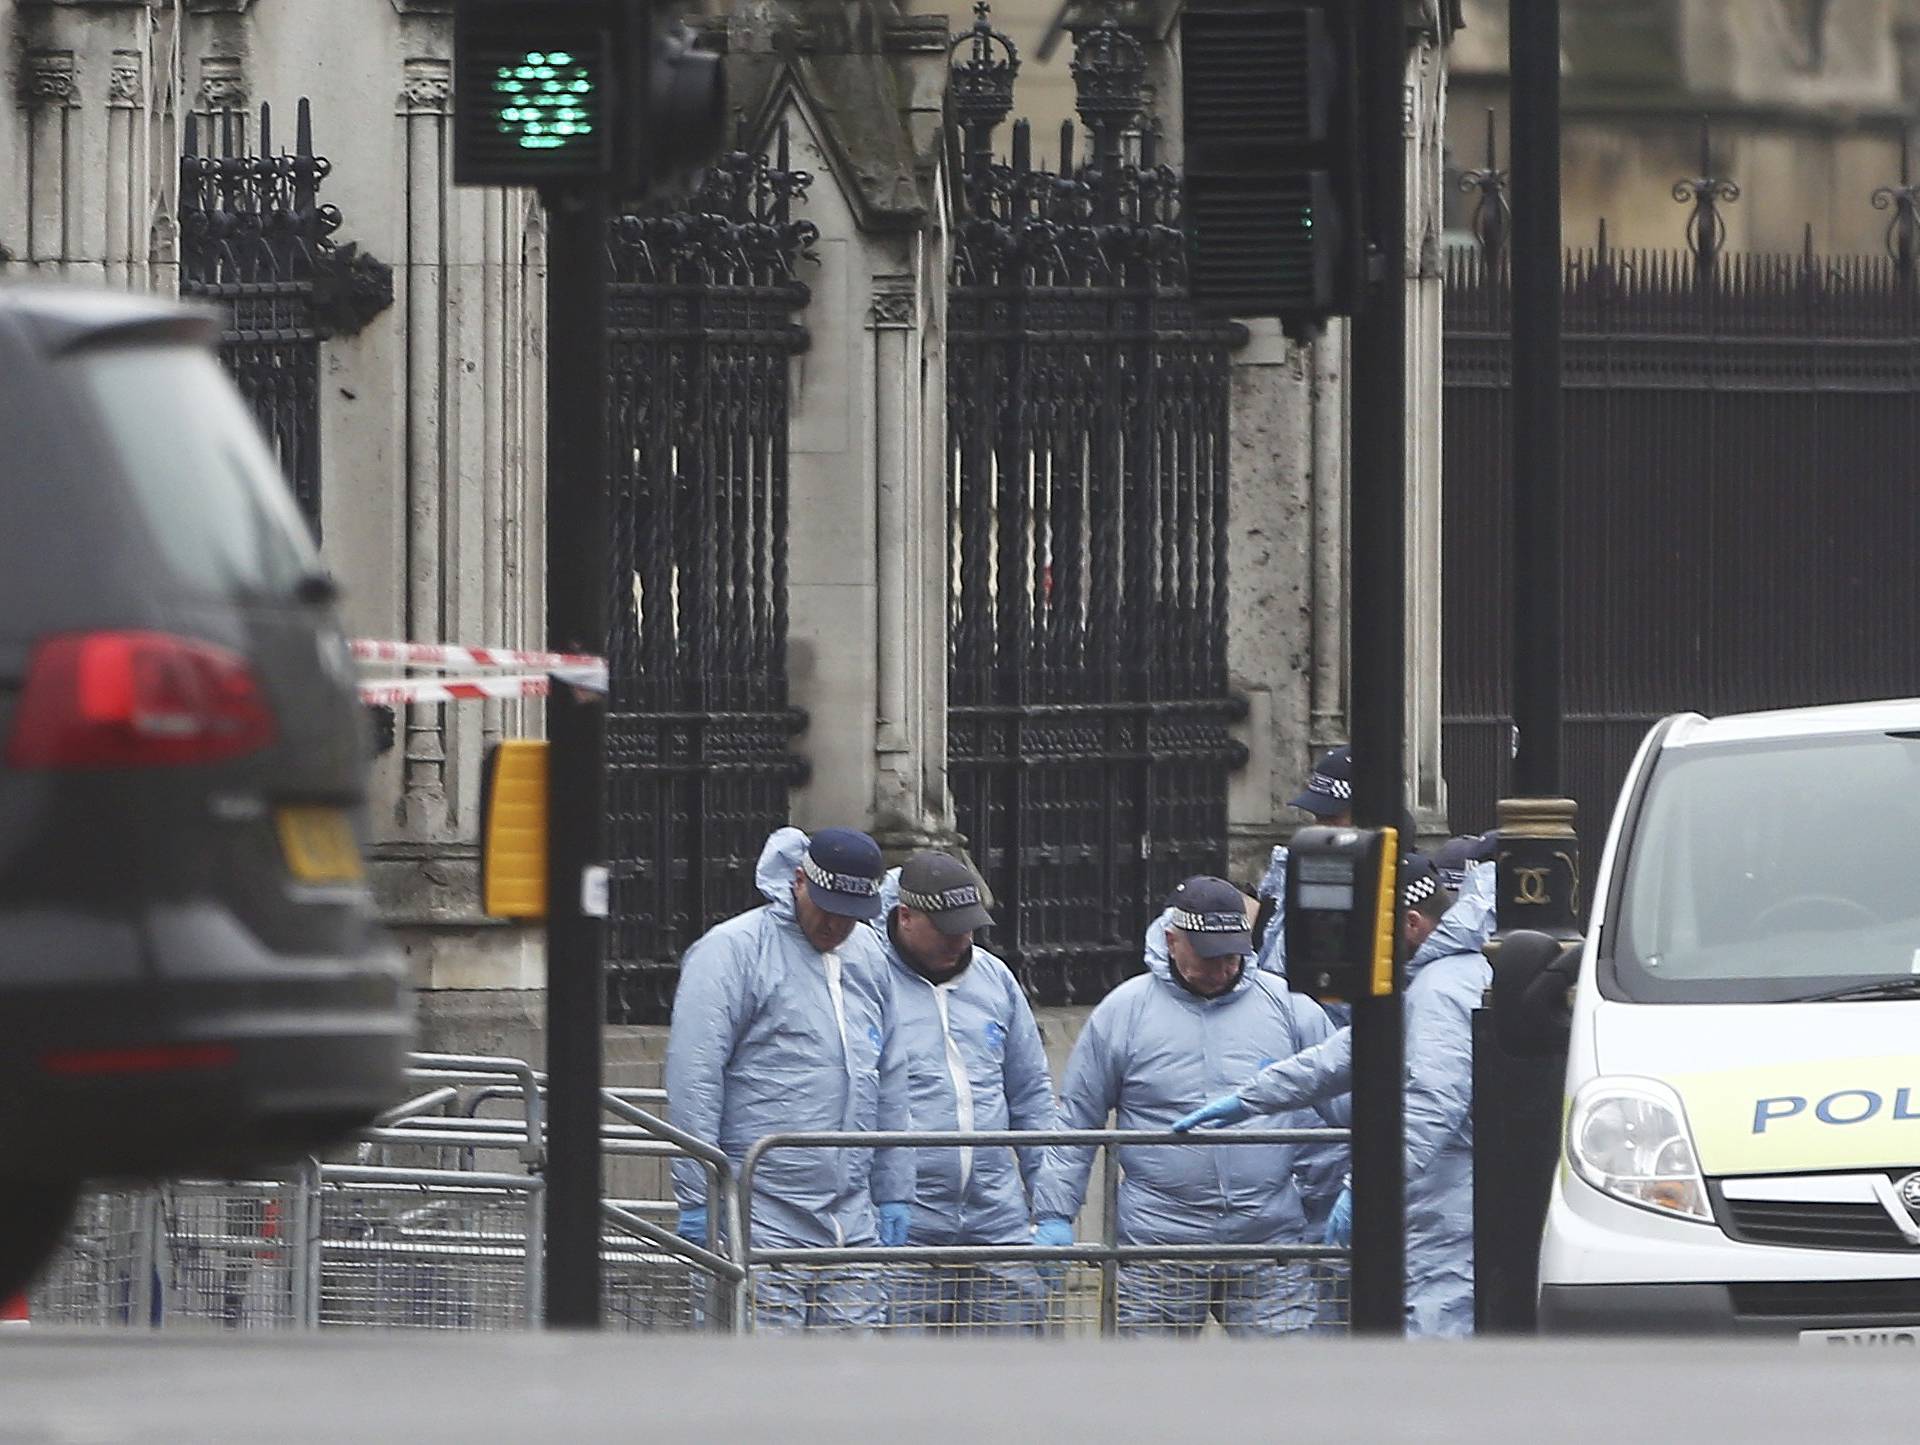 Police work at Carriage Gate outside the Houses of Parliament the morning after an attack by a man driving a car and weilding a knife left five people dead and dozens injured, in London